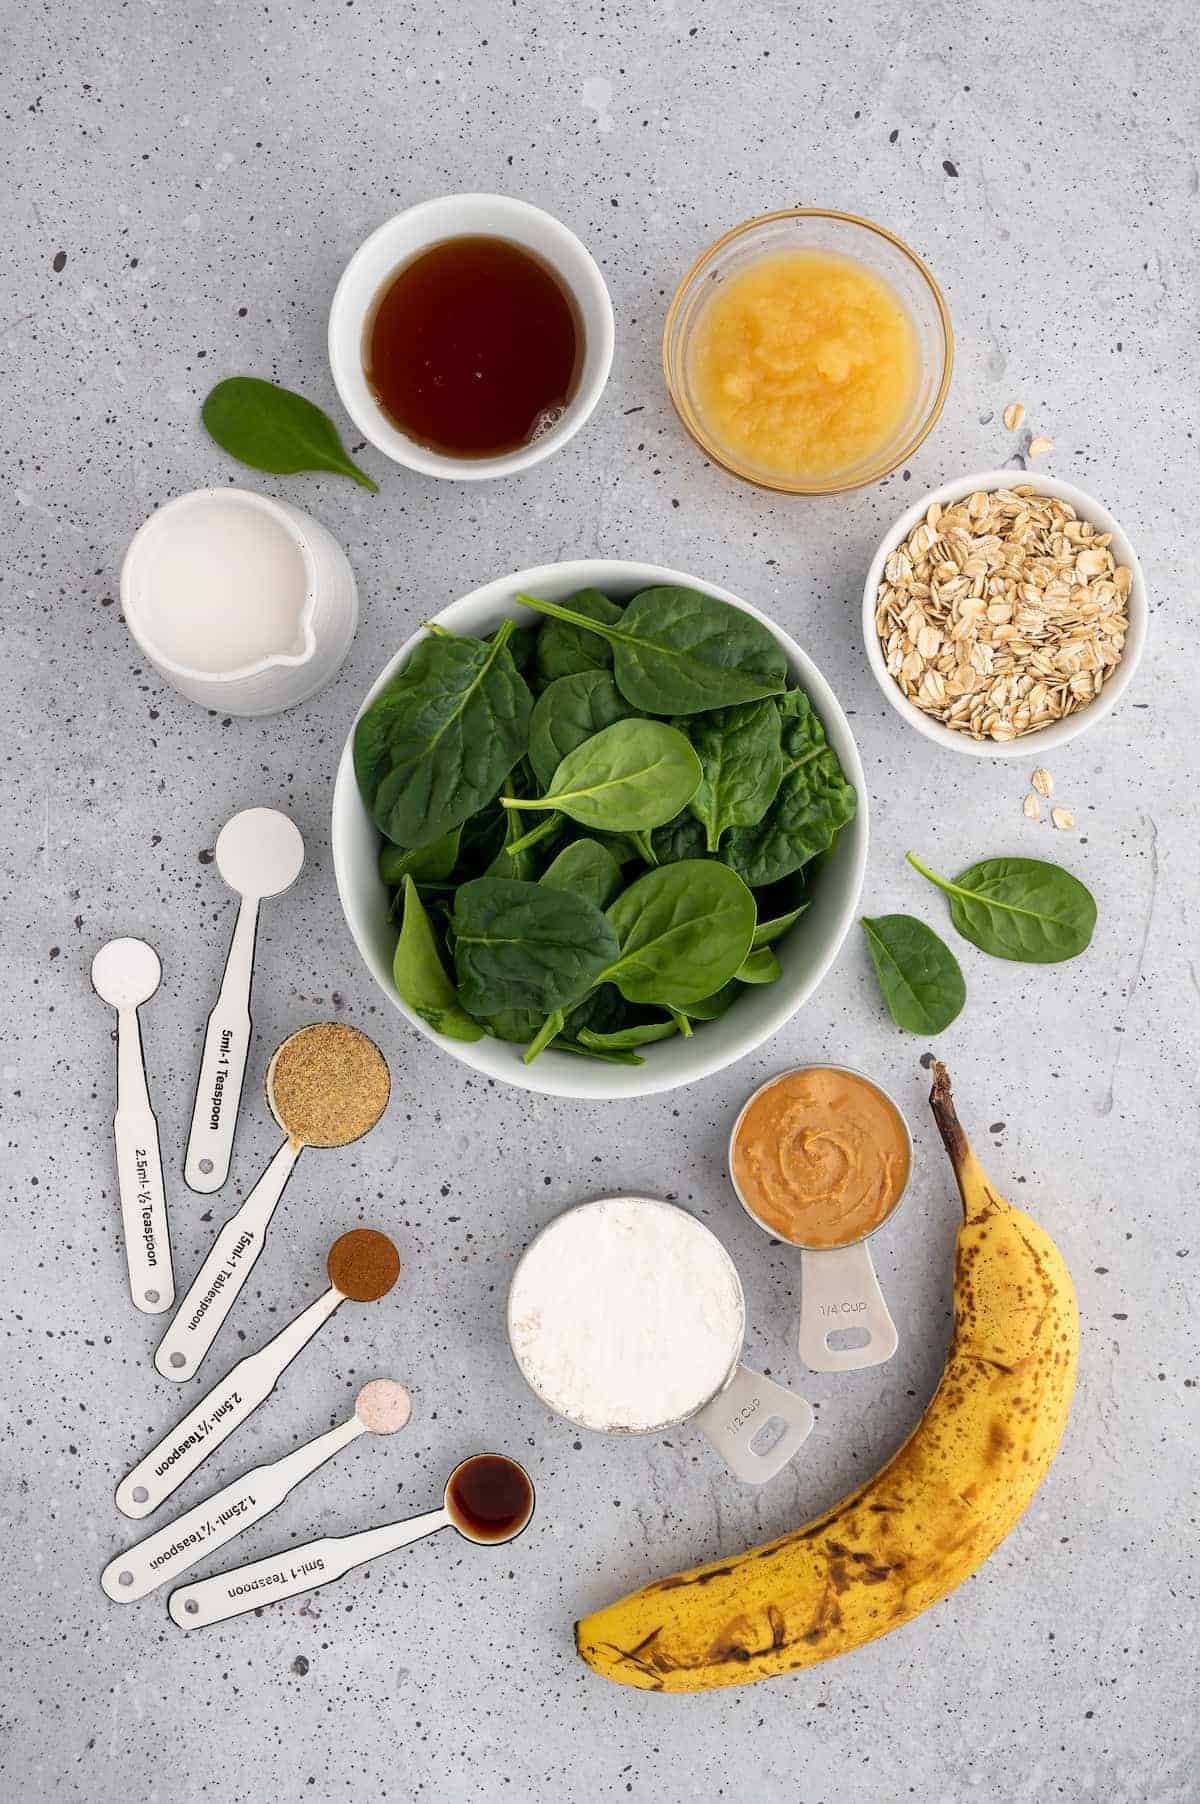 Key ingredients for spinach banana muffins.